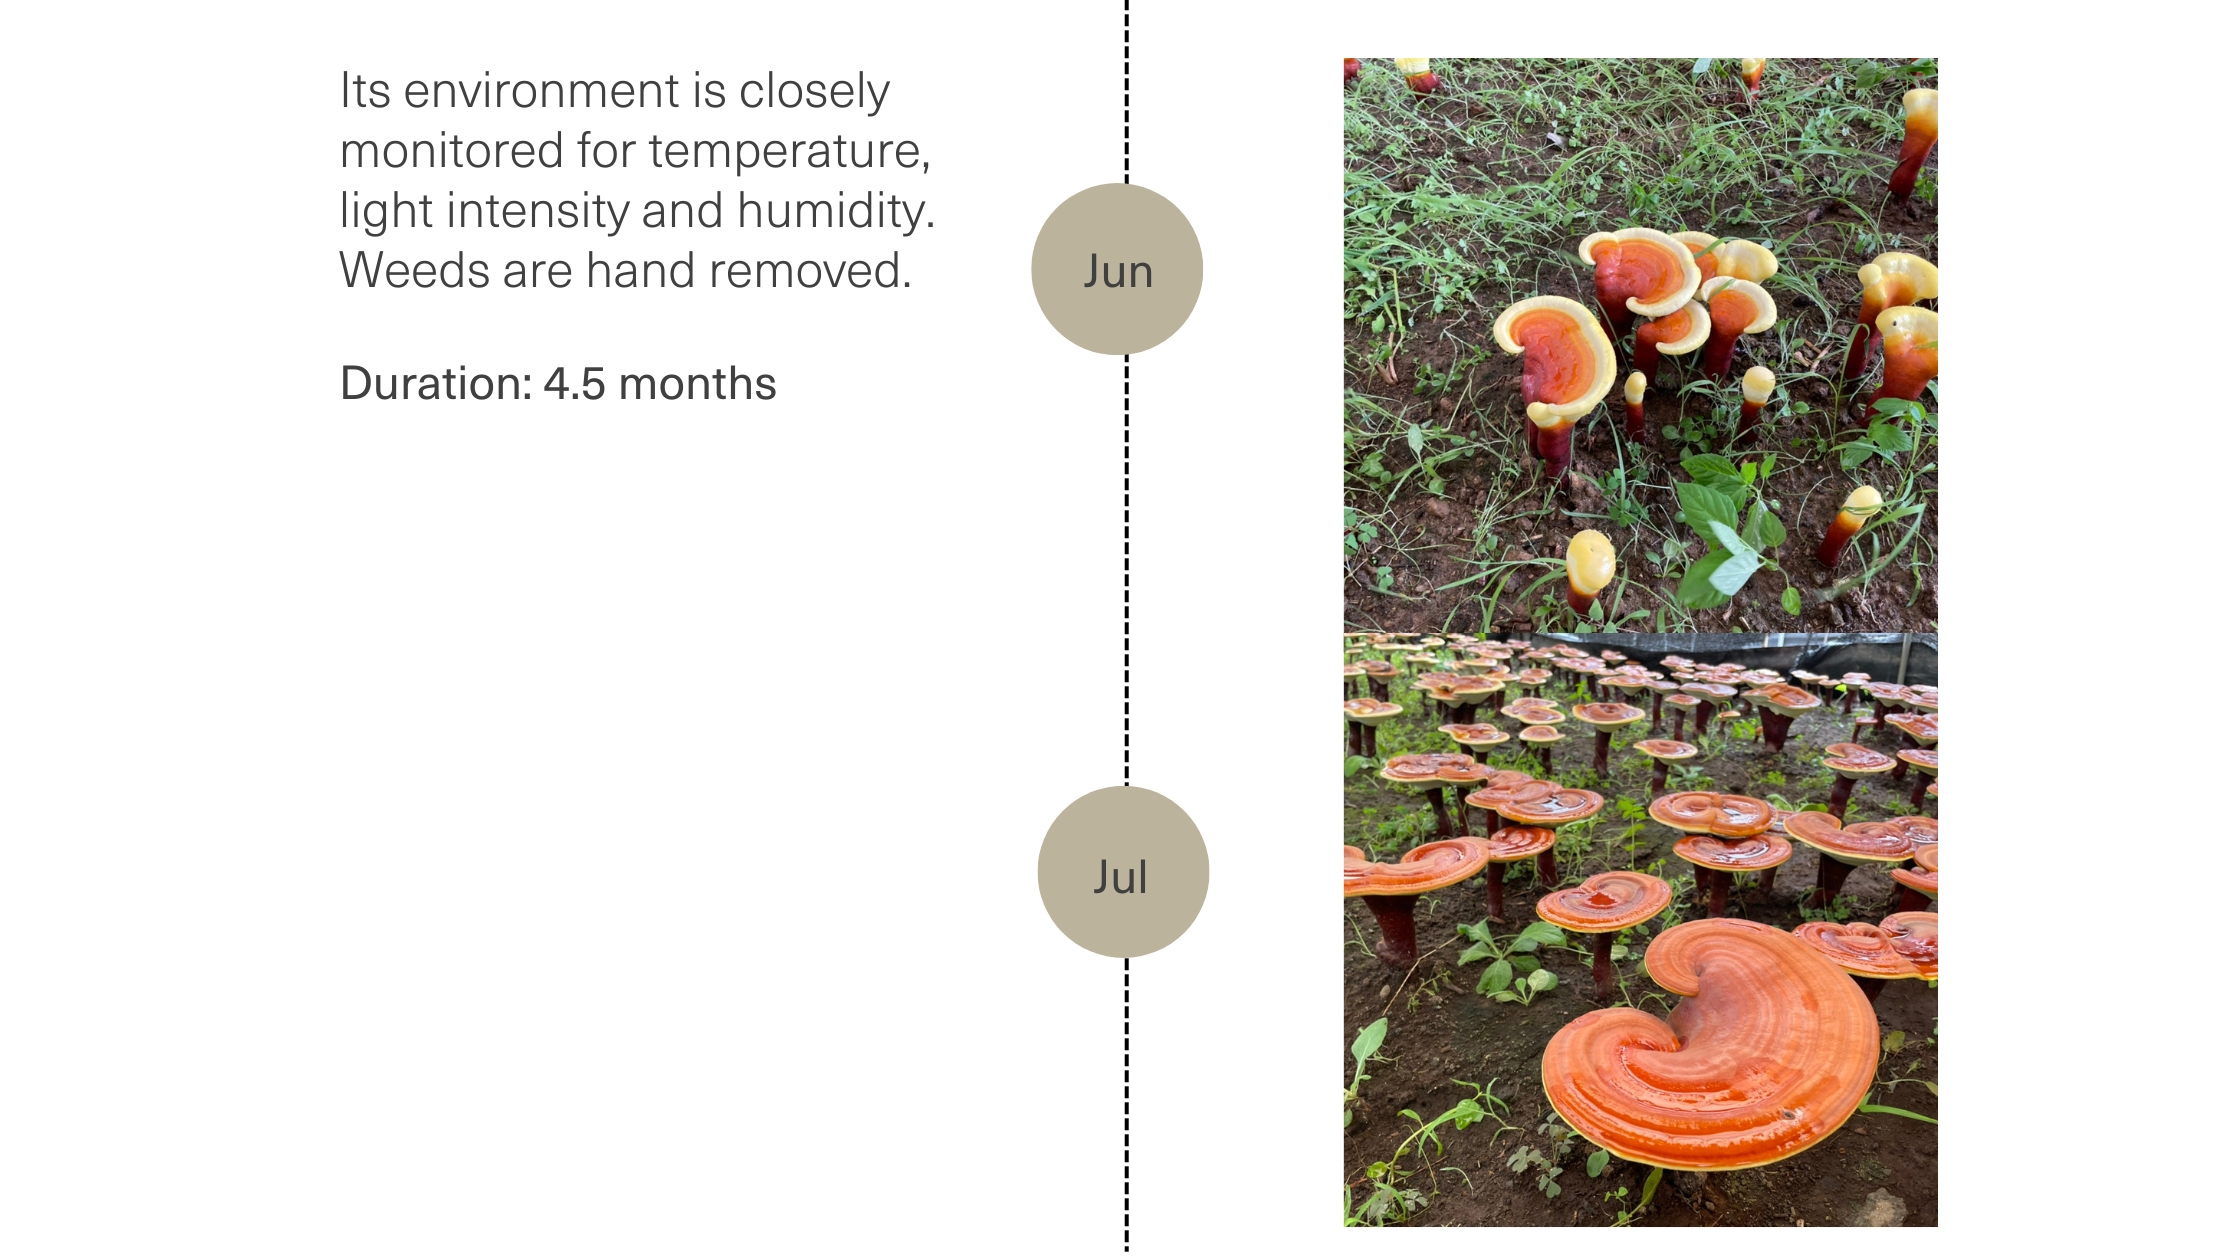 Cultivation of the reishi fruiting bodies